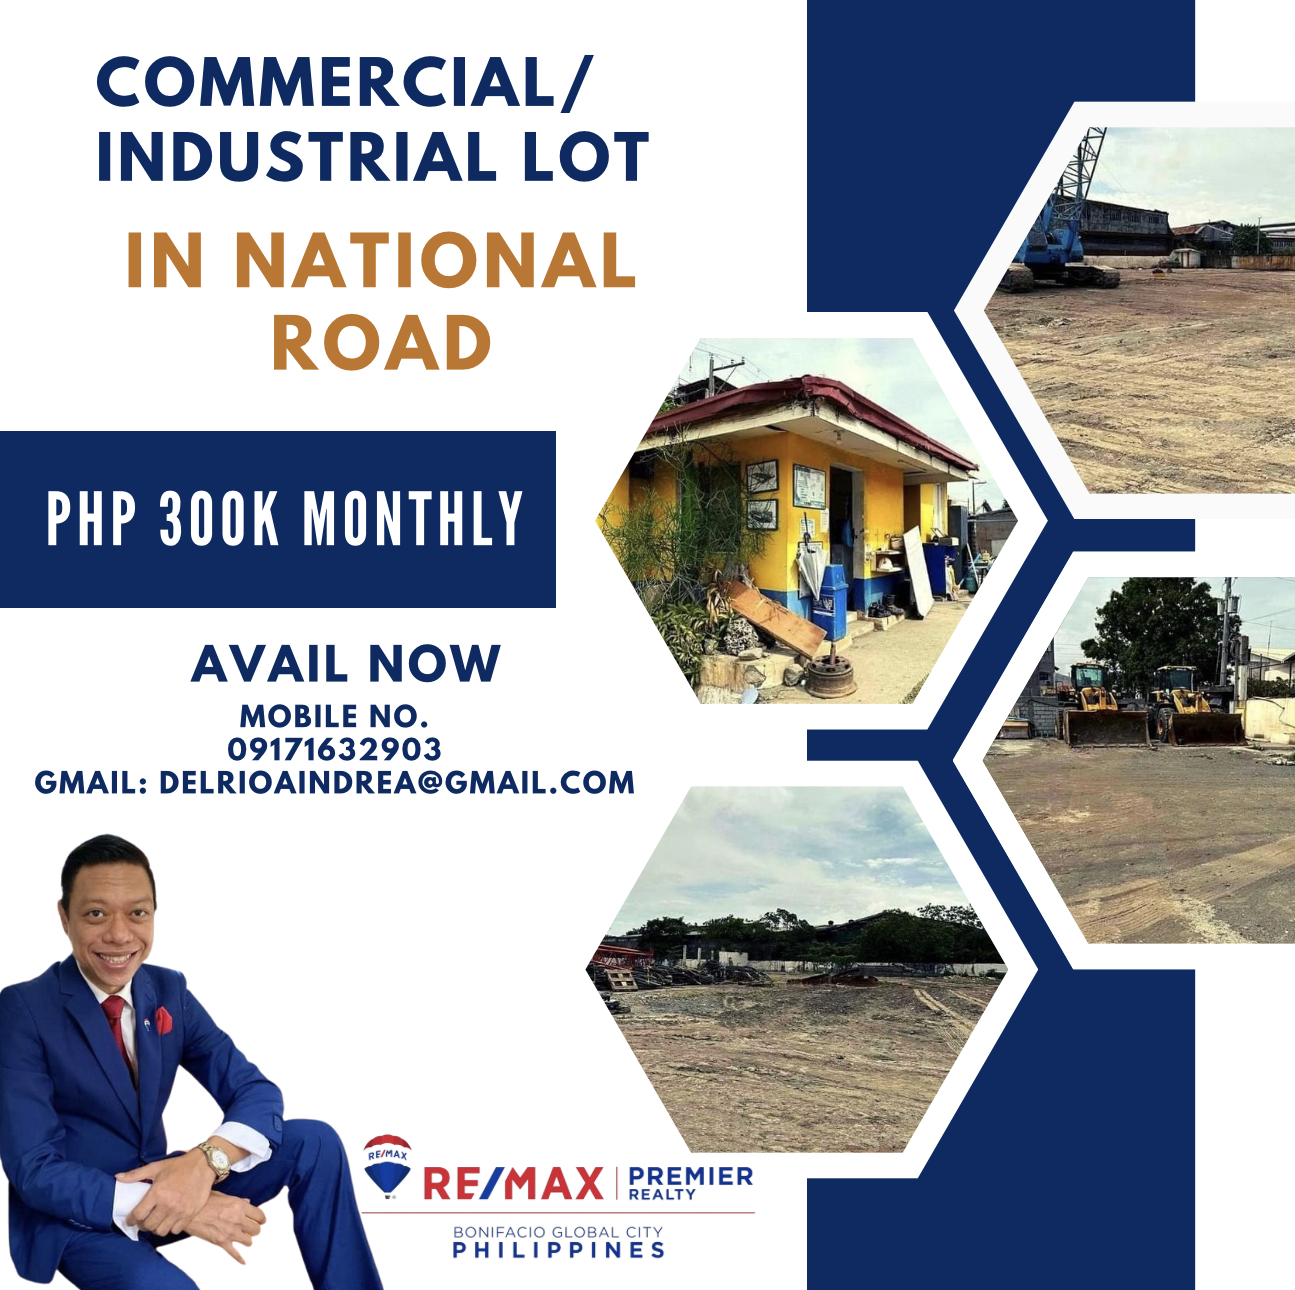 RESIDENTIAL PROPERTY FOR SALE in Wack – Wack Subdivision‼️